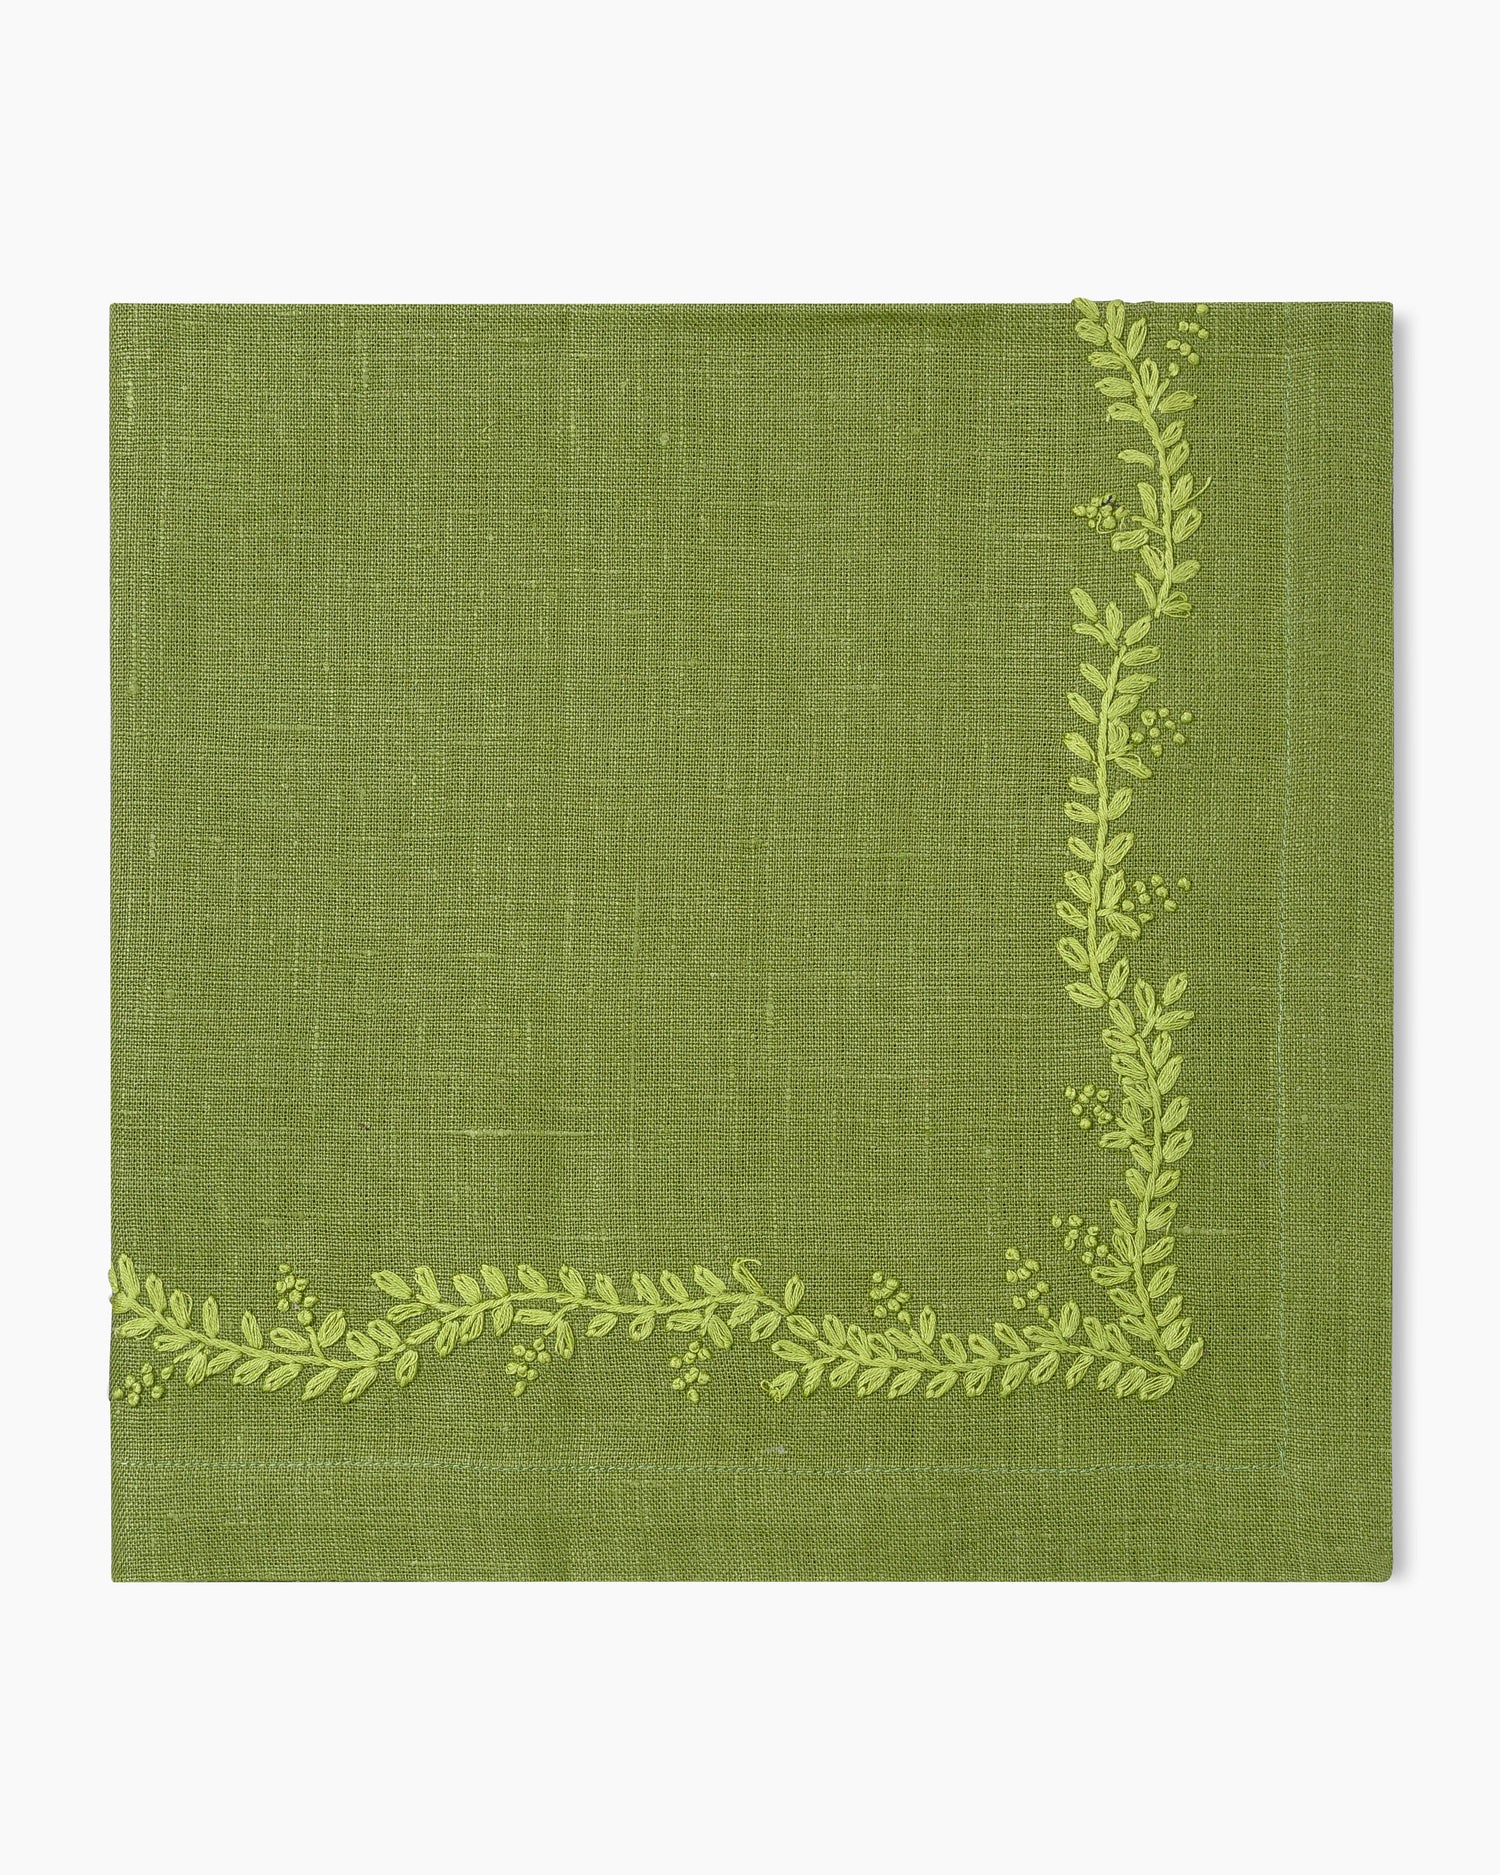 A Henry Handwork Prism Vine Linen Dinner Napkin in 13 colors featuring green leaves.